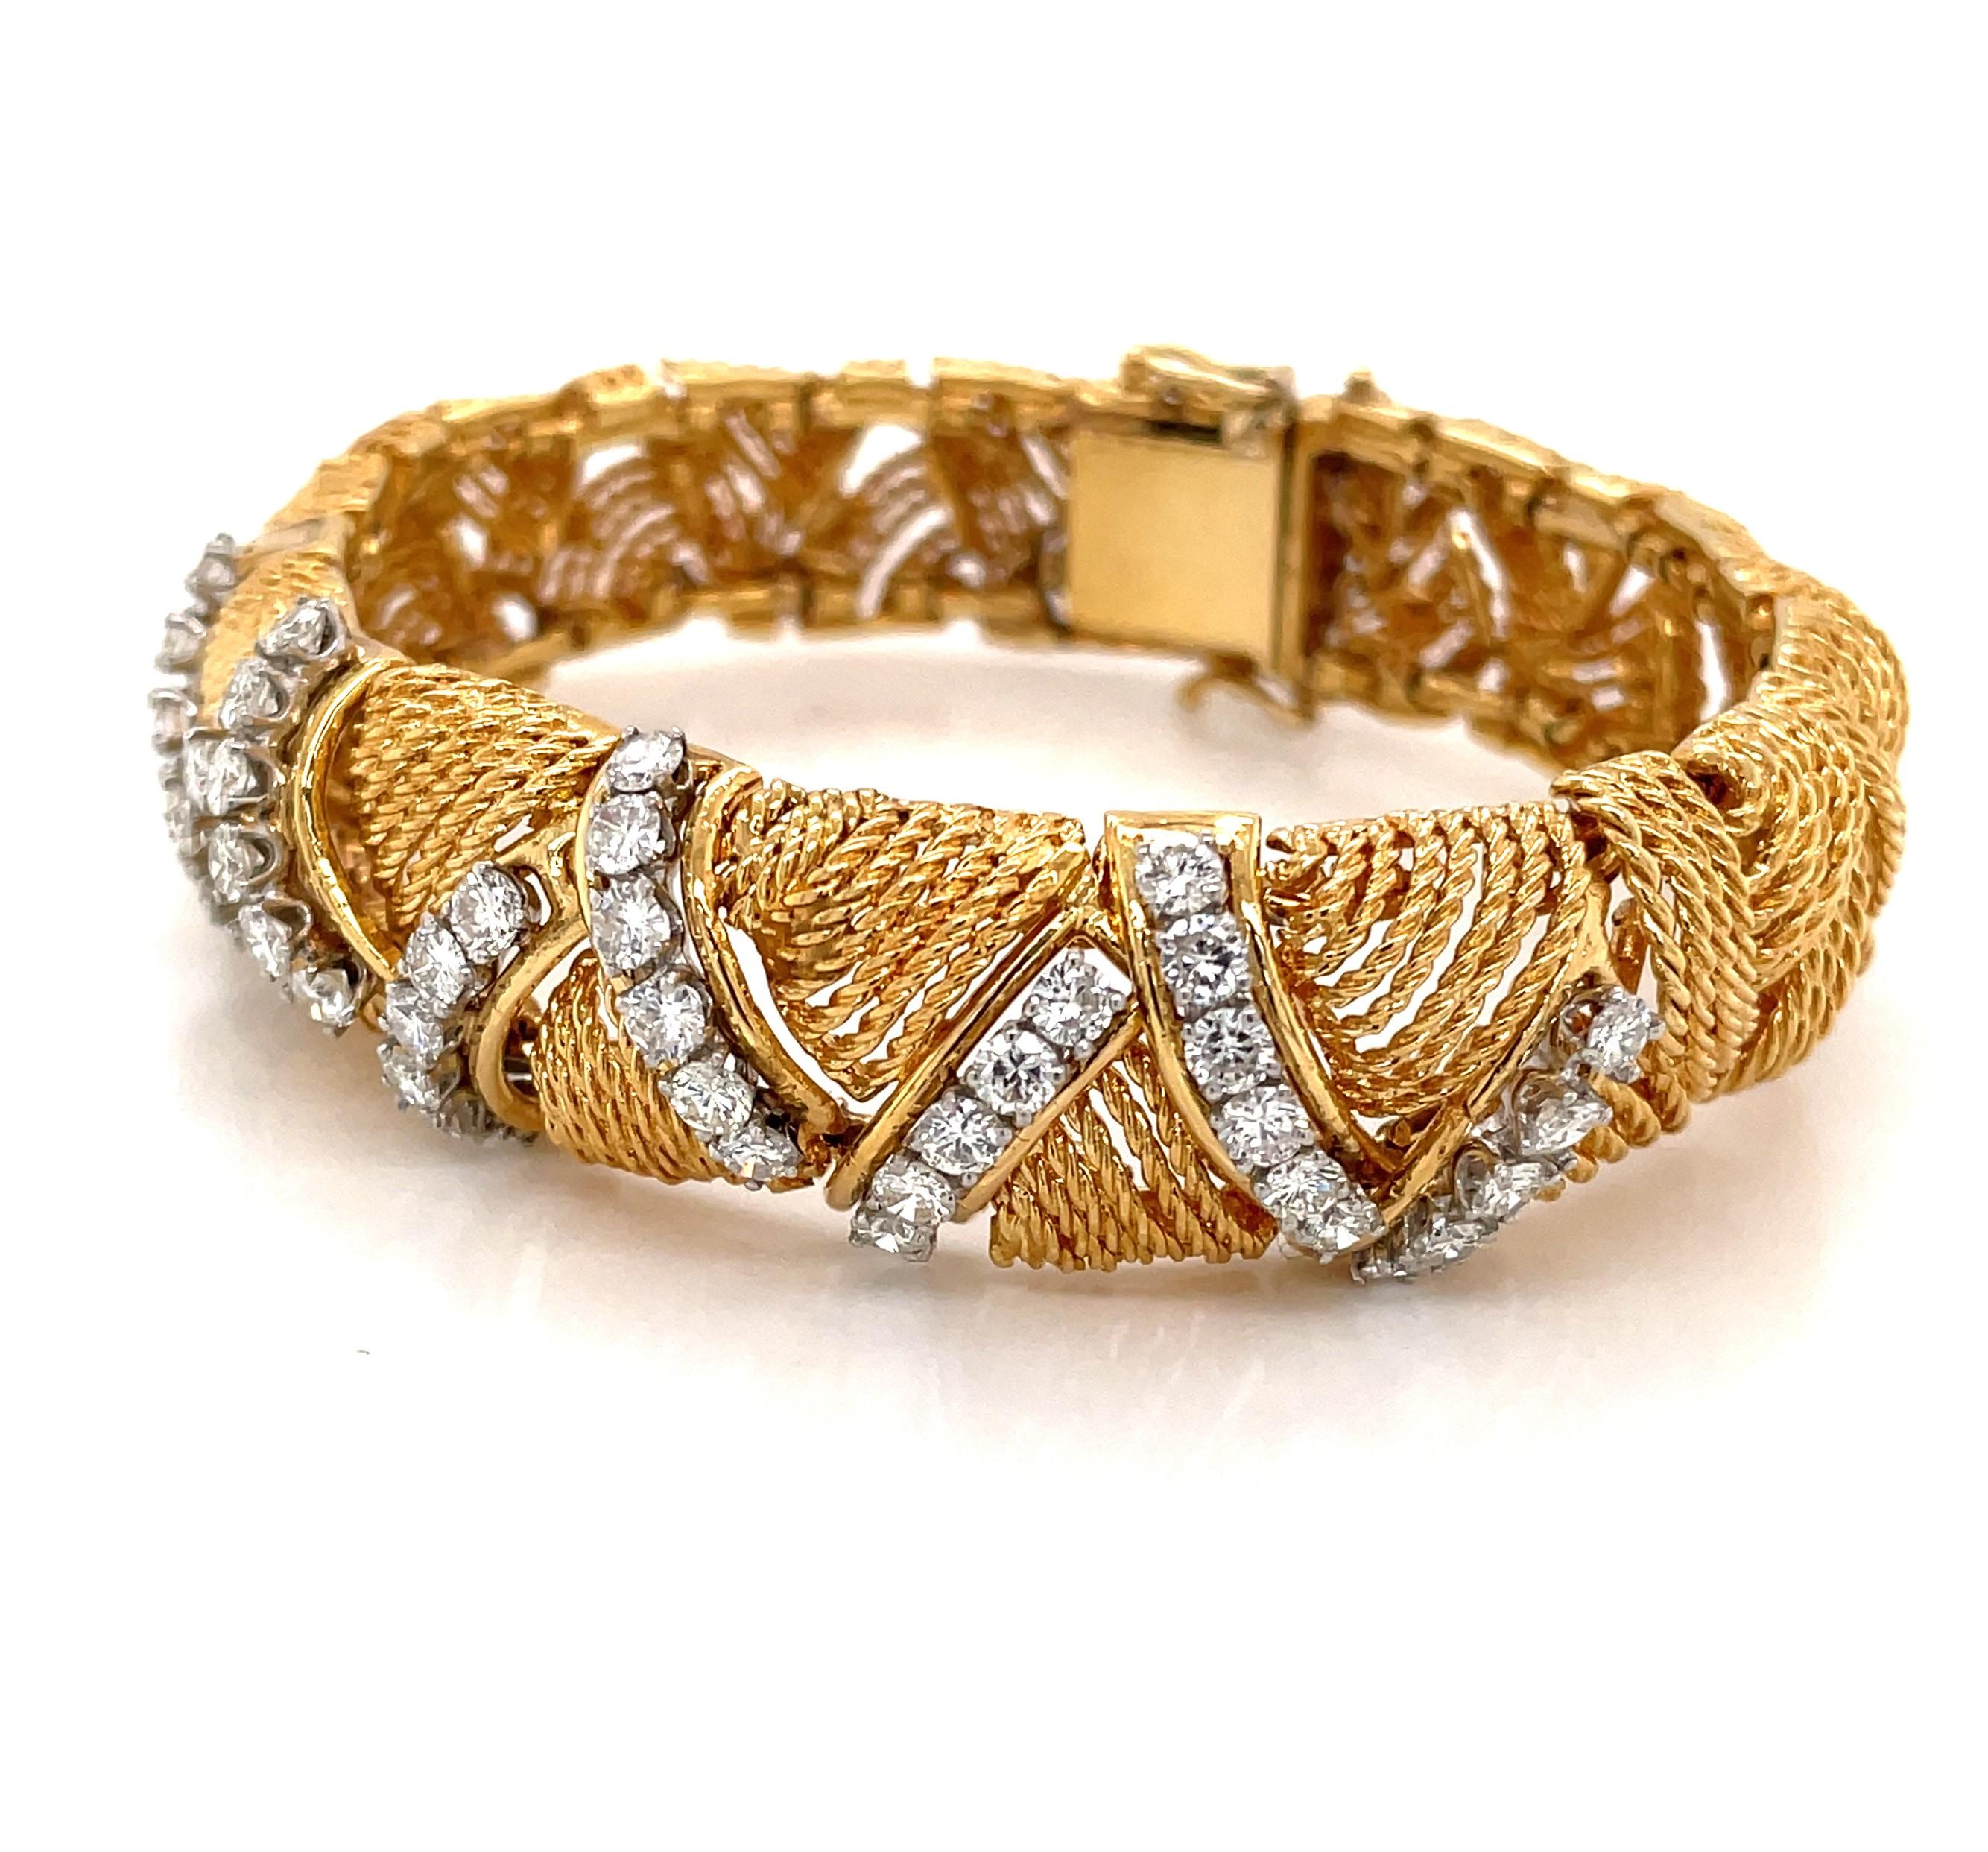 Woven 18 Karat Yellow Gold Rope Diamond Retro 1950's Bracelet   In Excellent Condition For Sale In Mount Kisco, NY